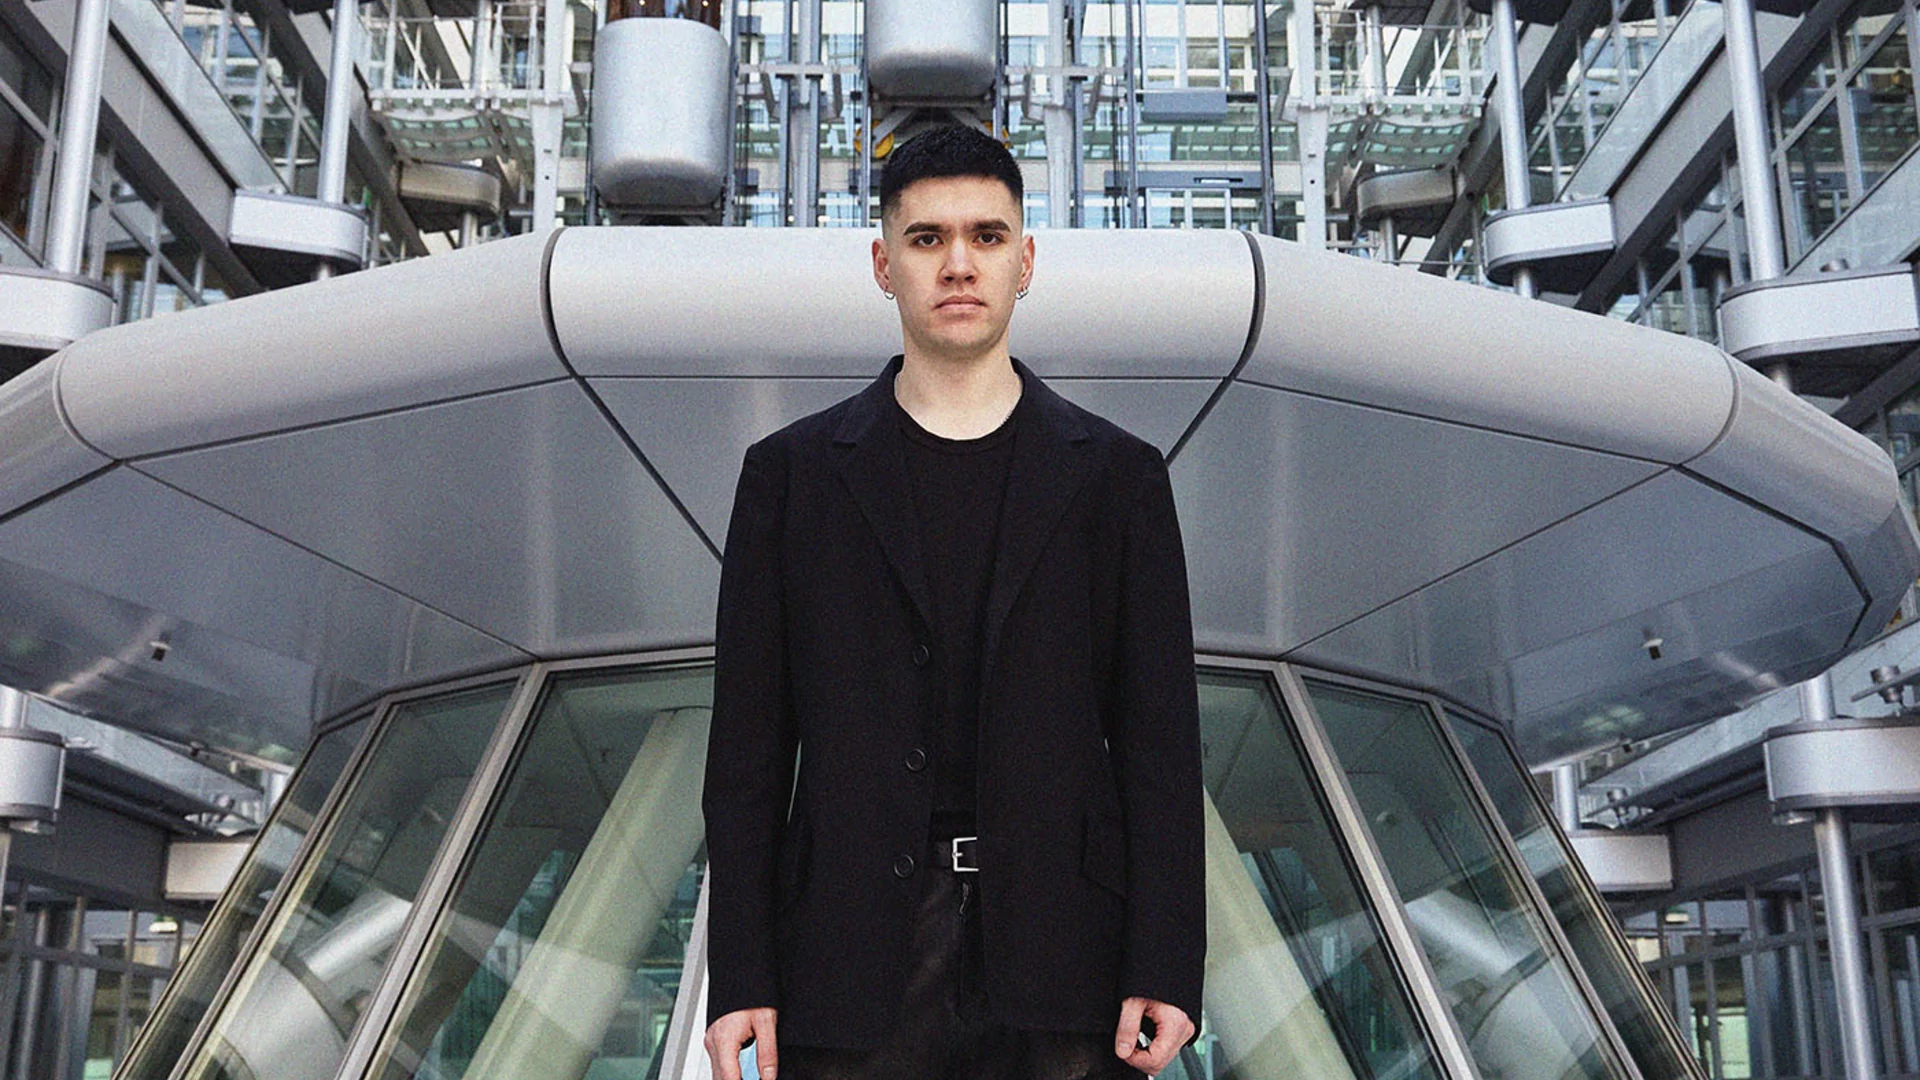 Photo of Phase Fatale standing in front of a tall modern building with many windows. He's wearing a black suit jacket and black t-shirt